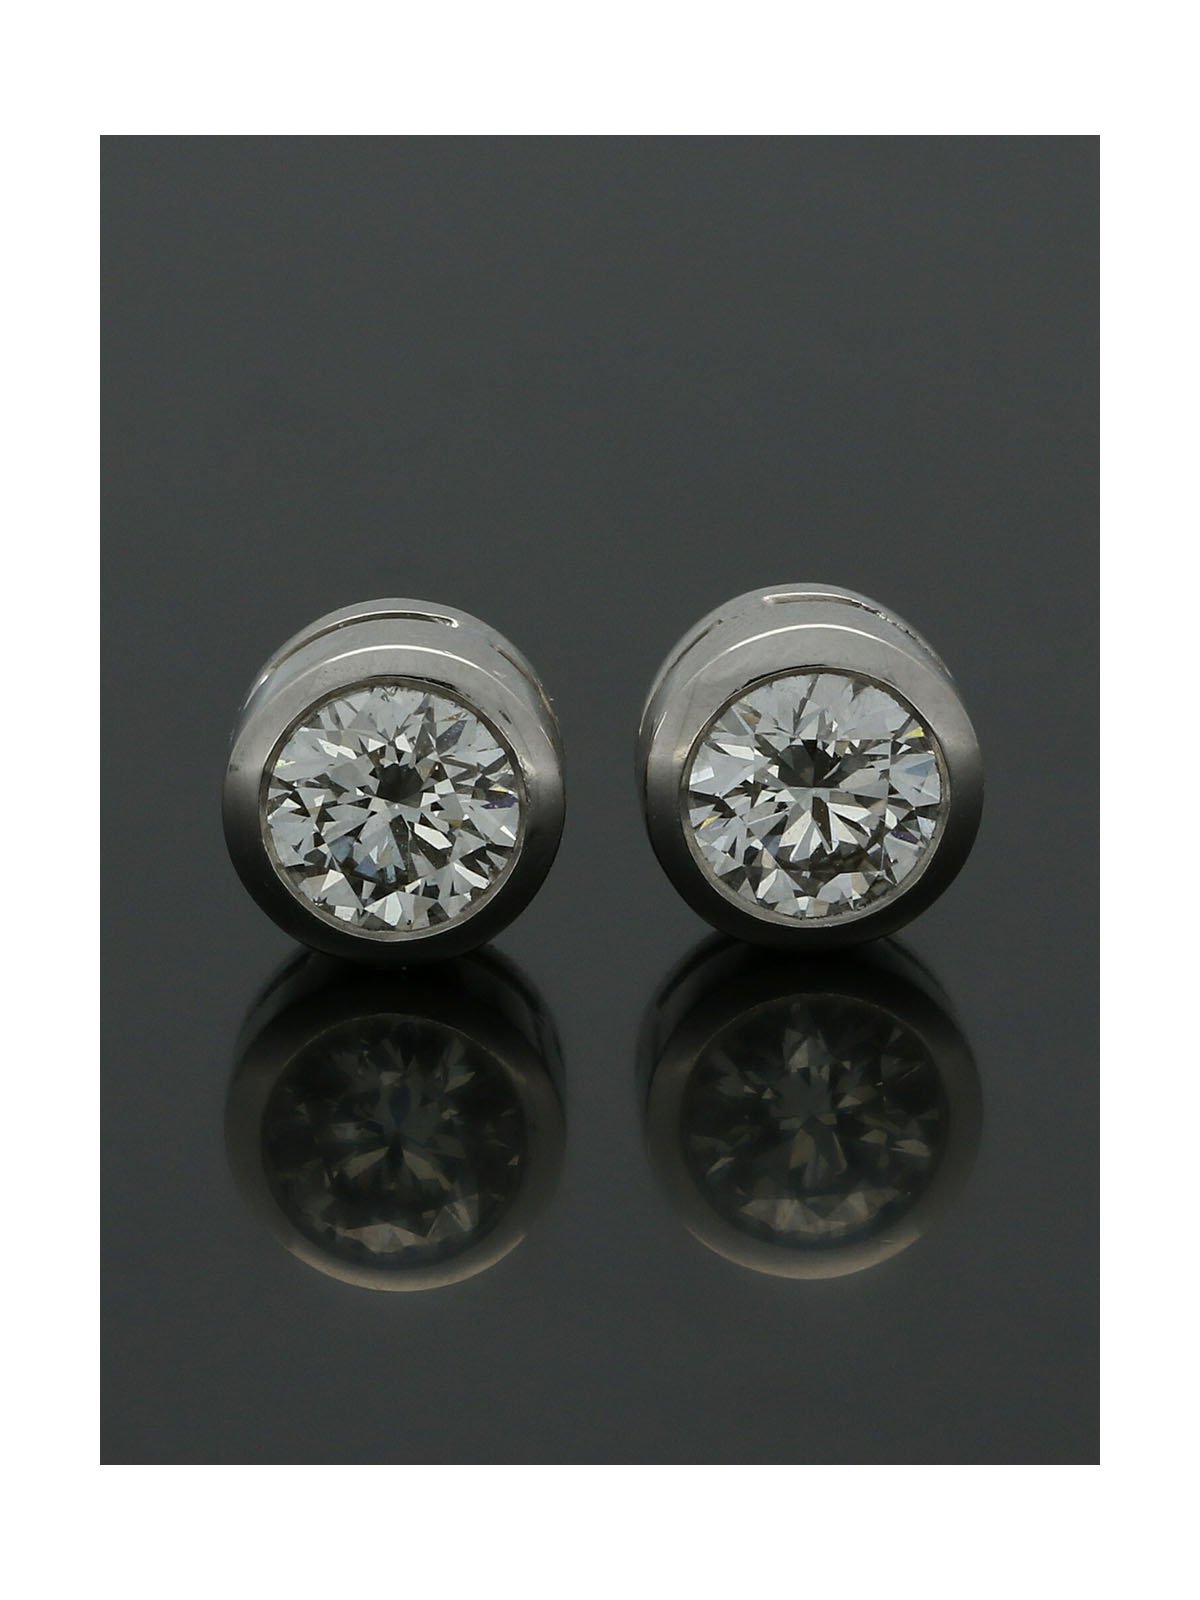 Diamond Solitaire Stud Earrings "The Diana Collection" 0.80ct Round Brilliant Cut in 18ct White Gold